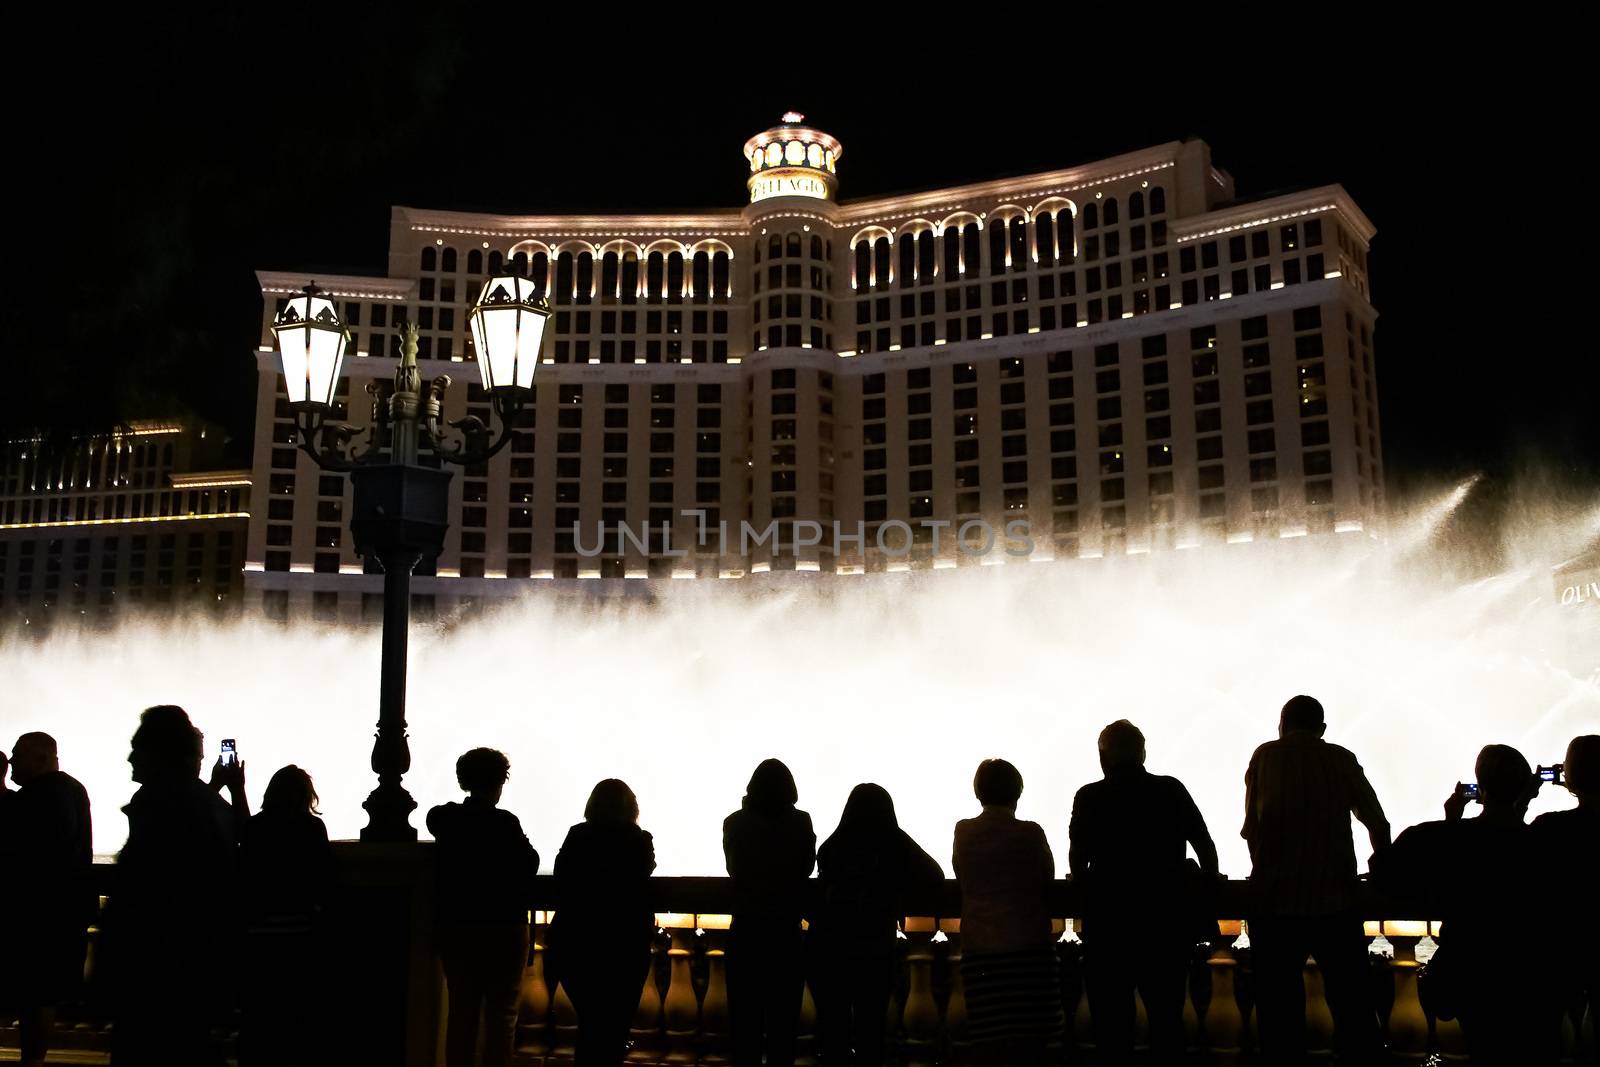 Night scene with silhouettes of people admiring the Bellagio fountains spectacle at Las Vegas by USA-TARO